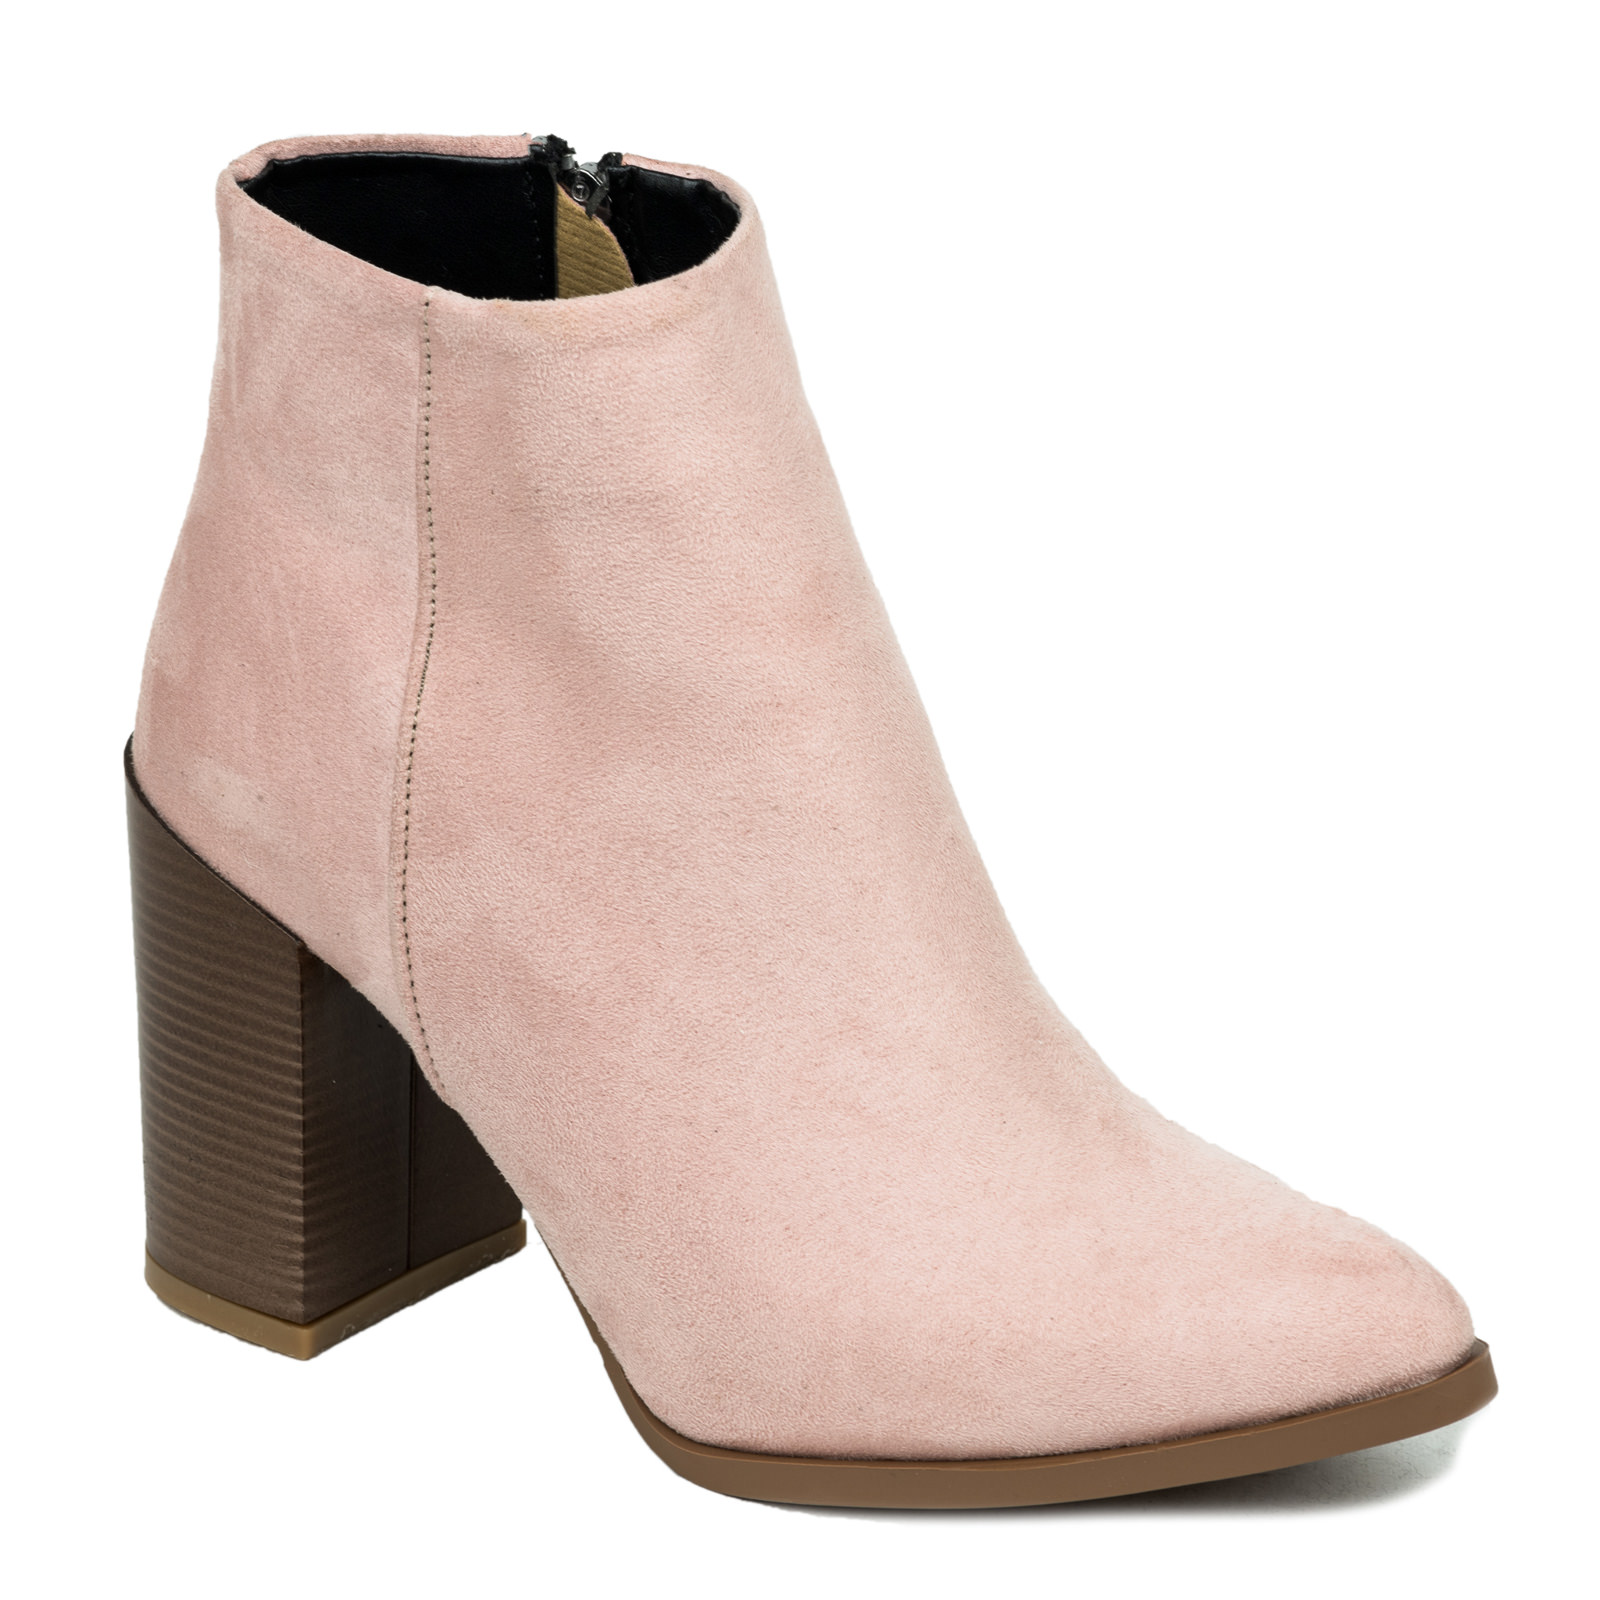 Women ankle boots B162 - ROSE